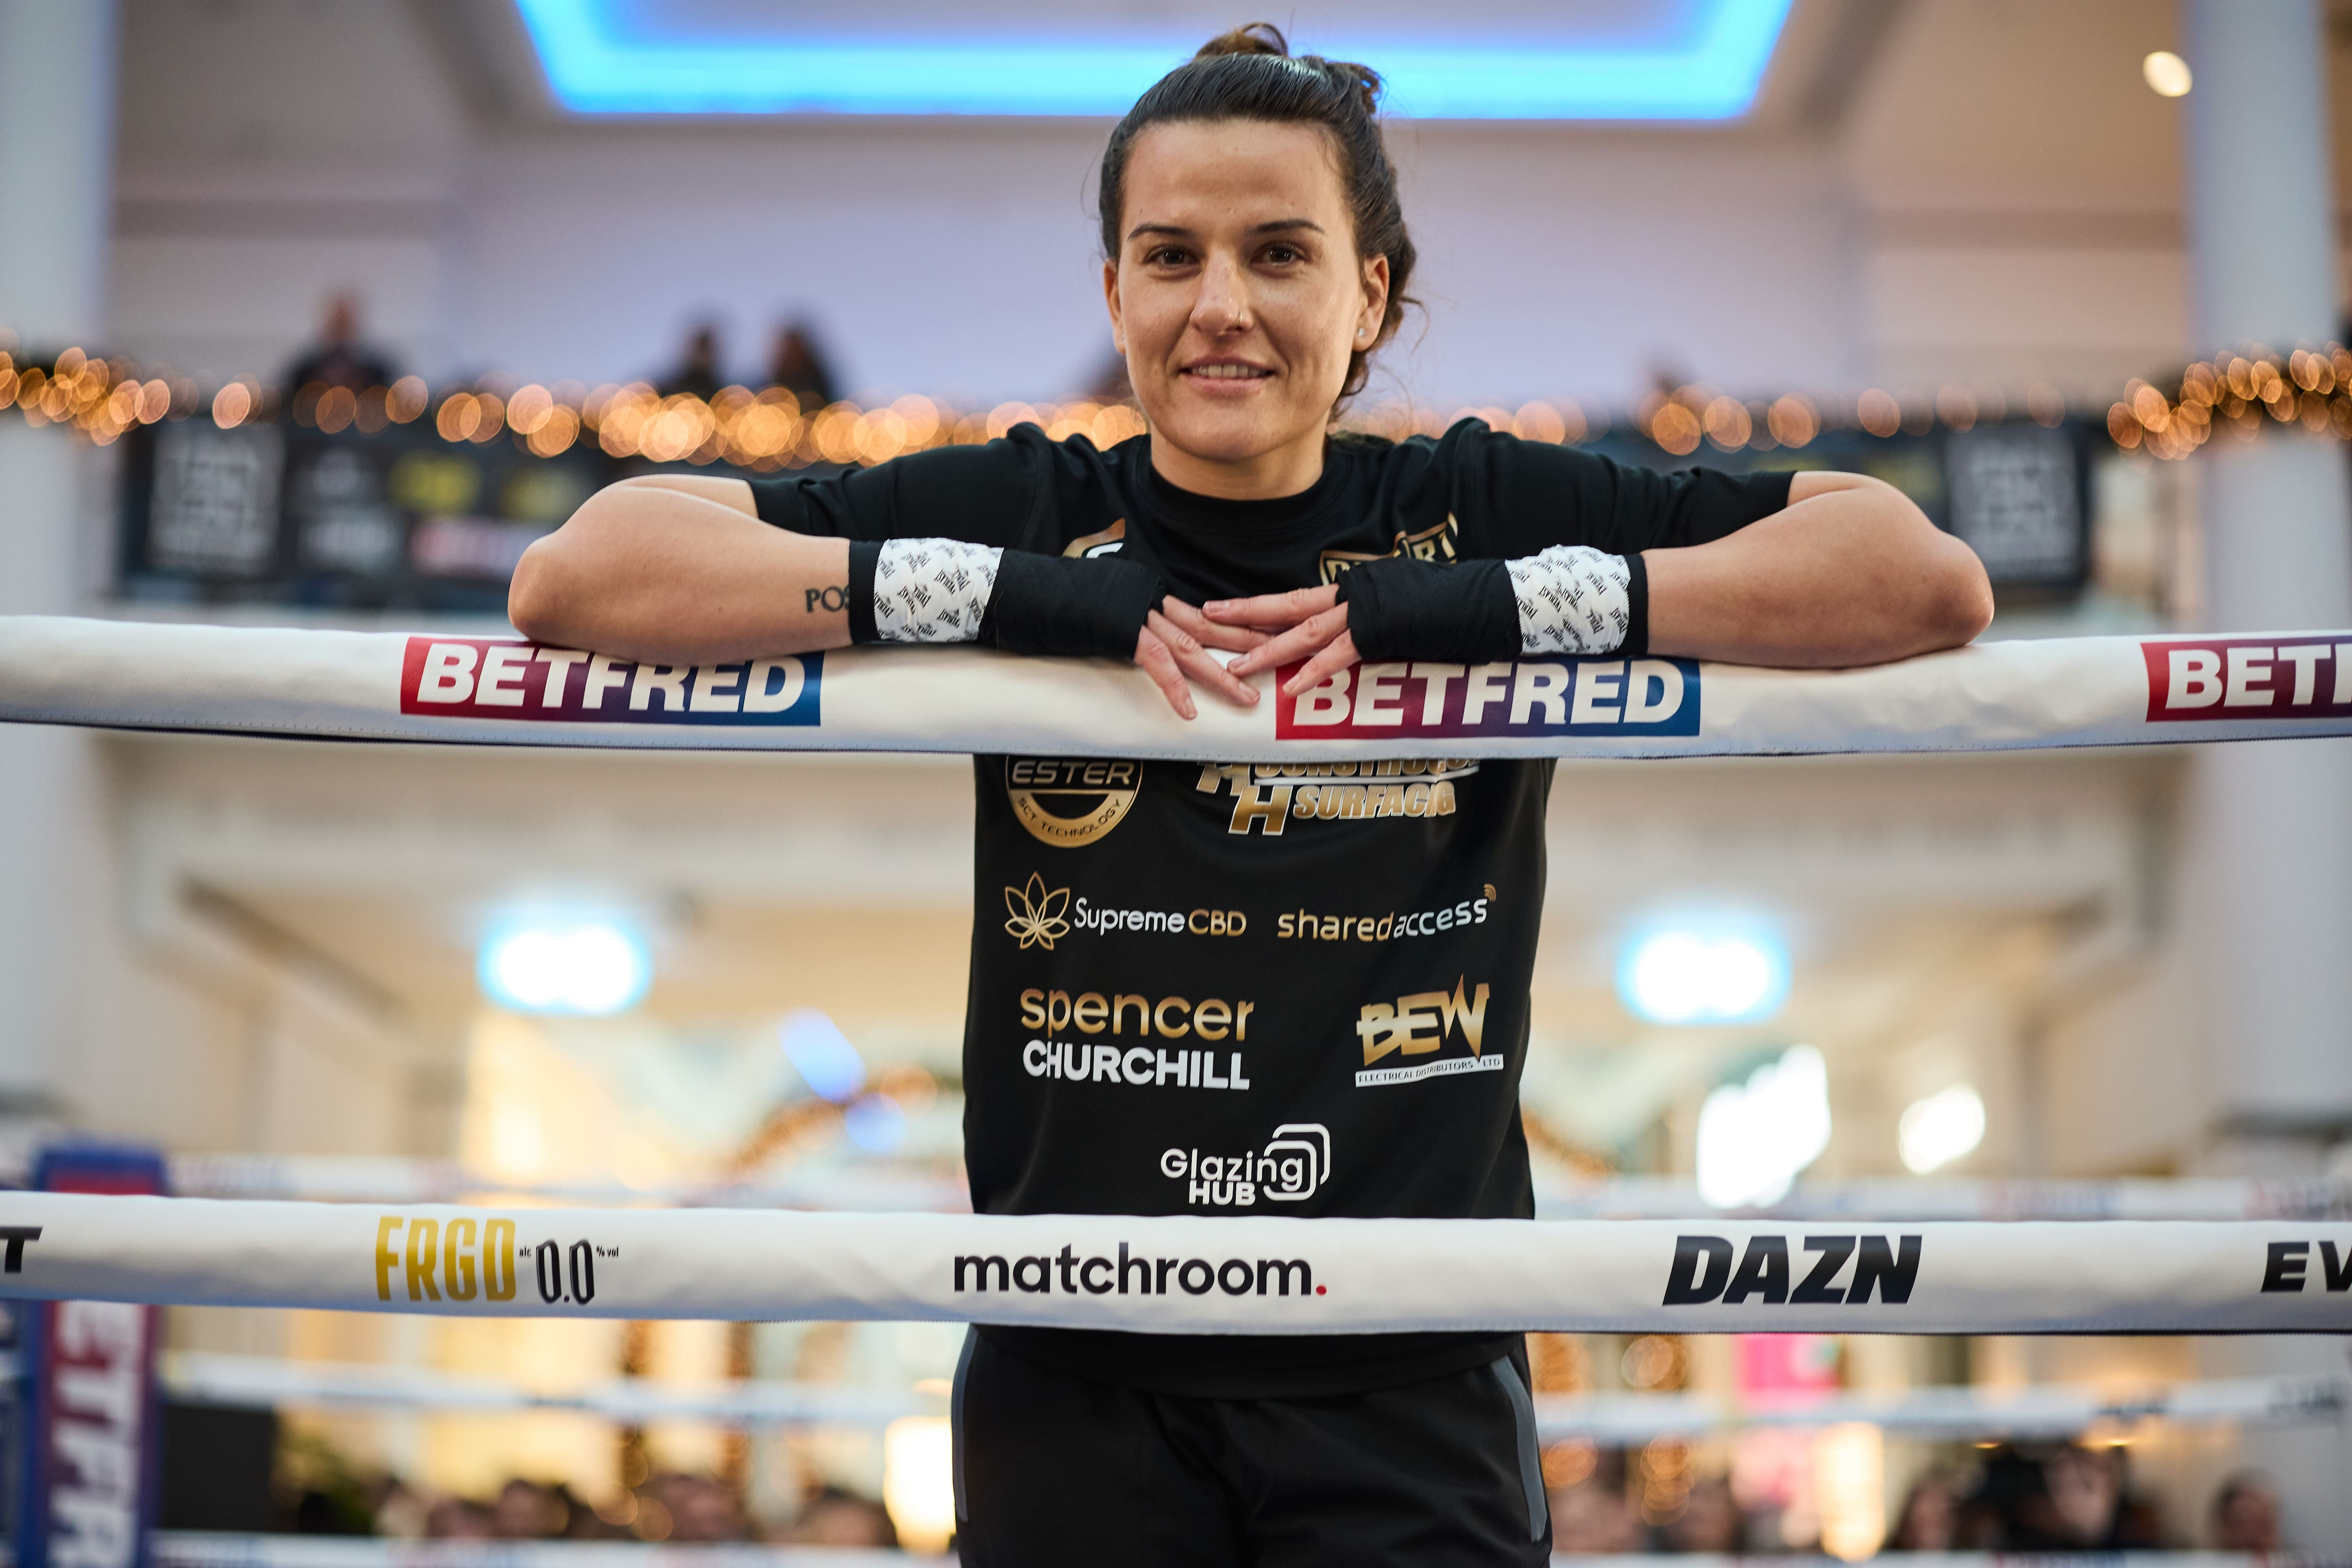 Cameron full of confidence ahead of rematch with Taylor